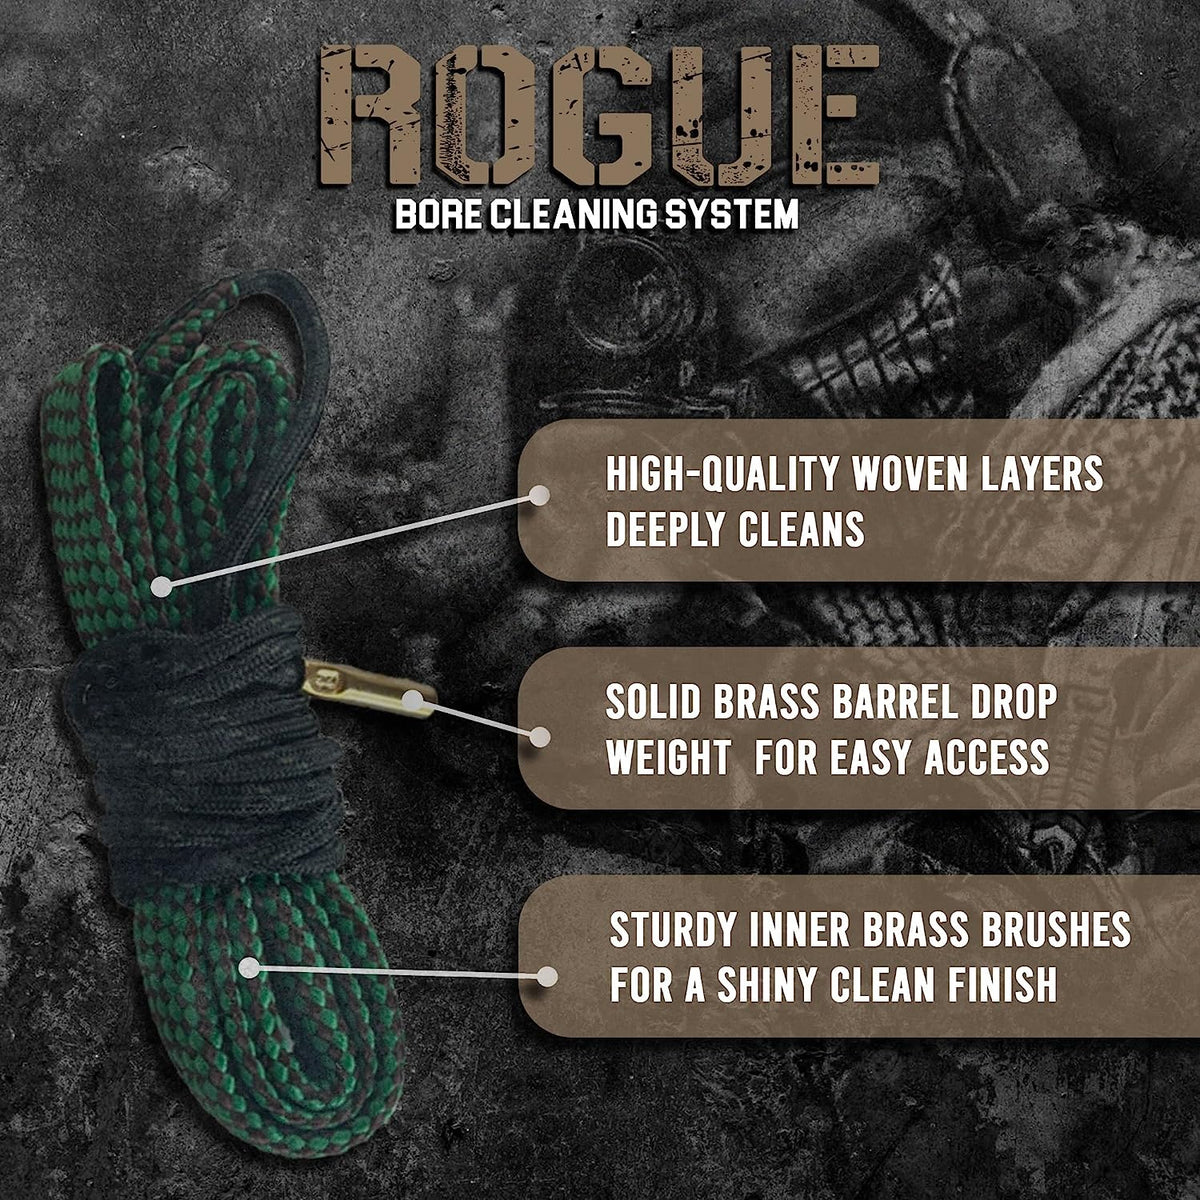 Rogue - Barrel Cleaning Snake